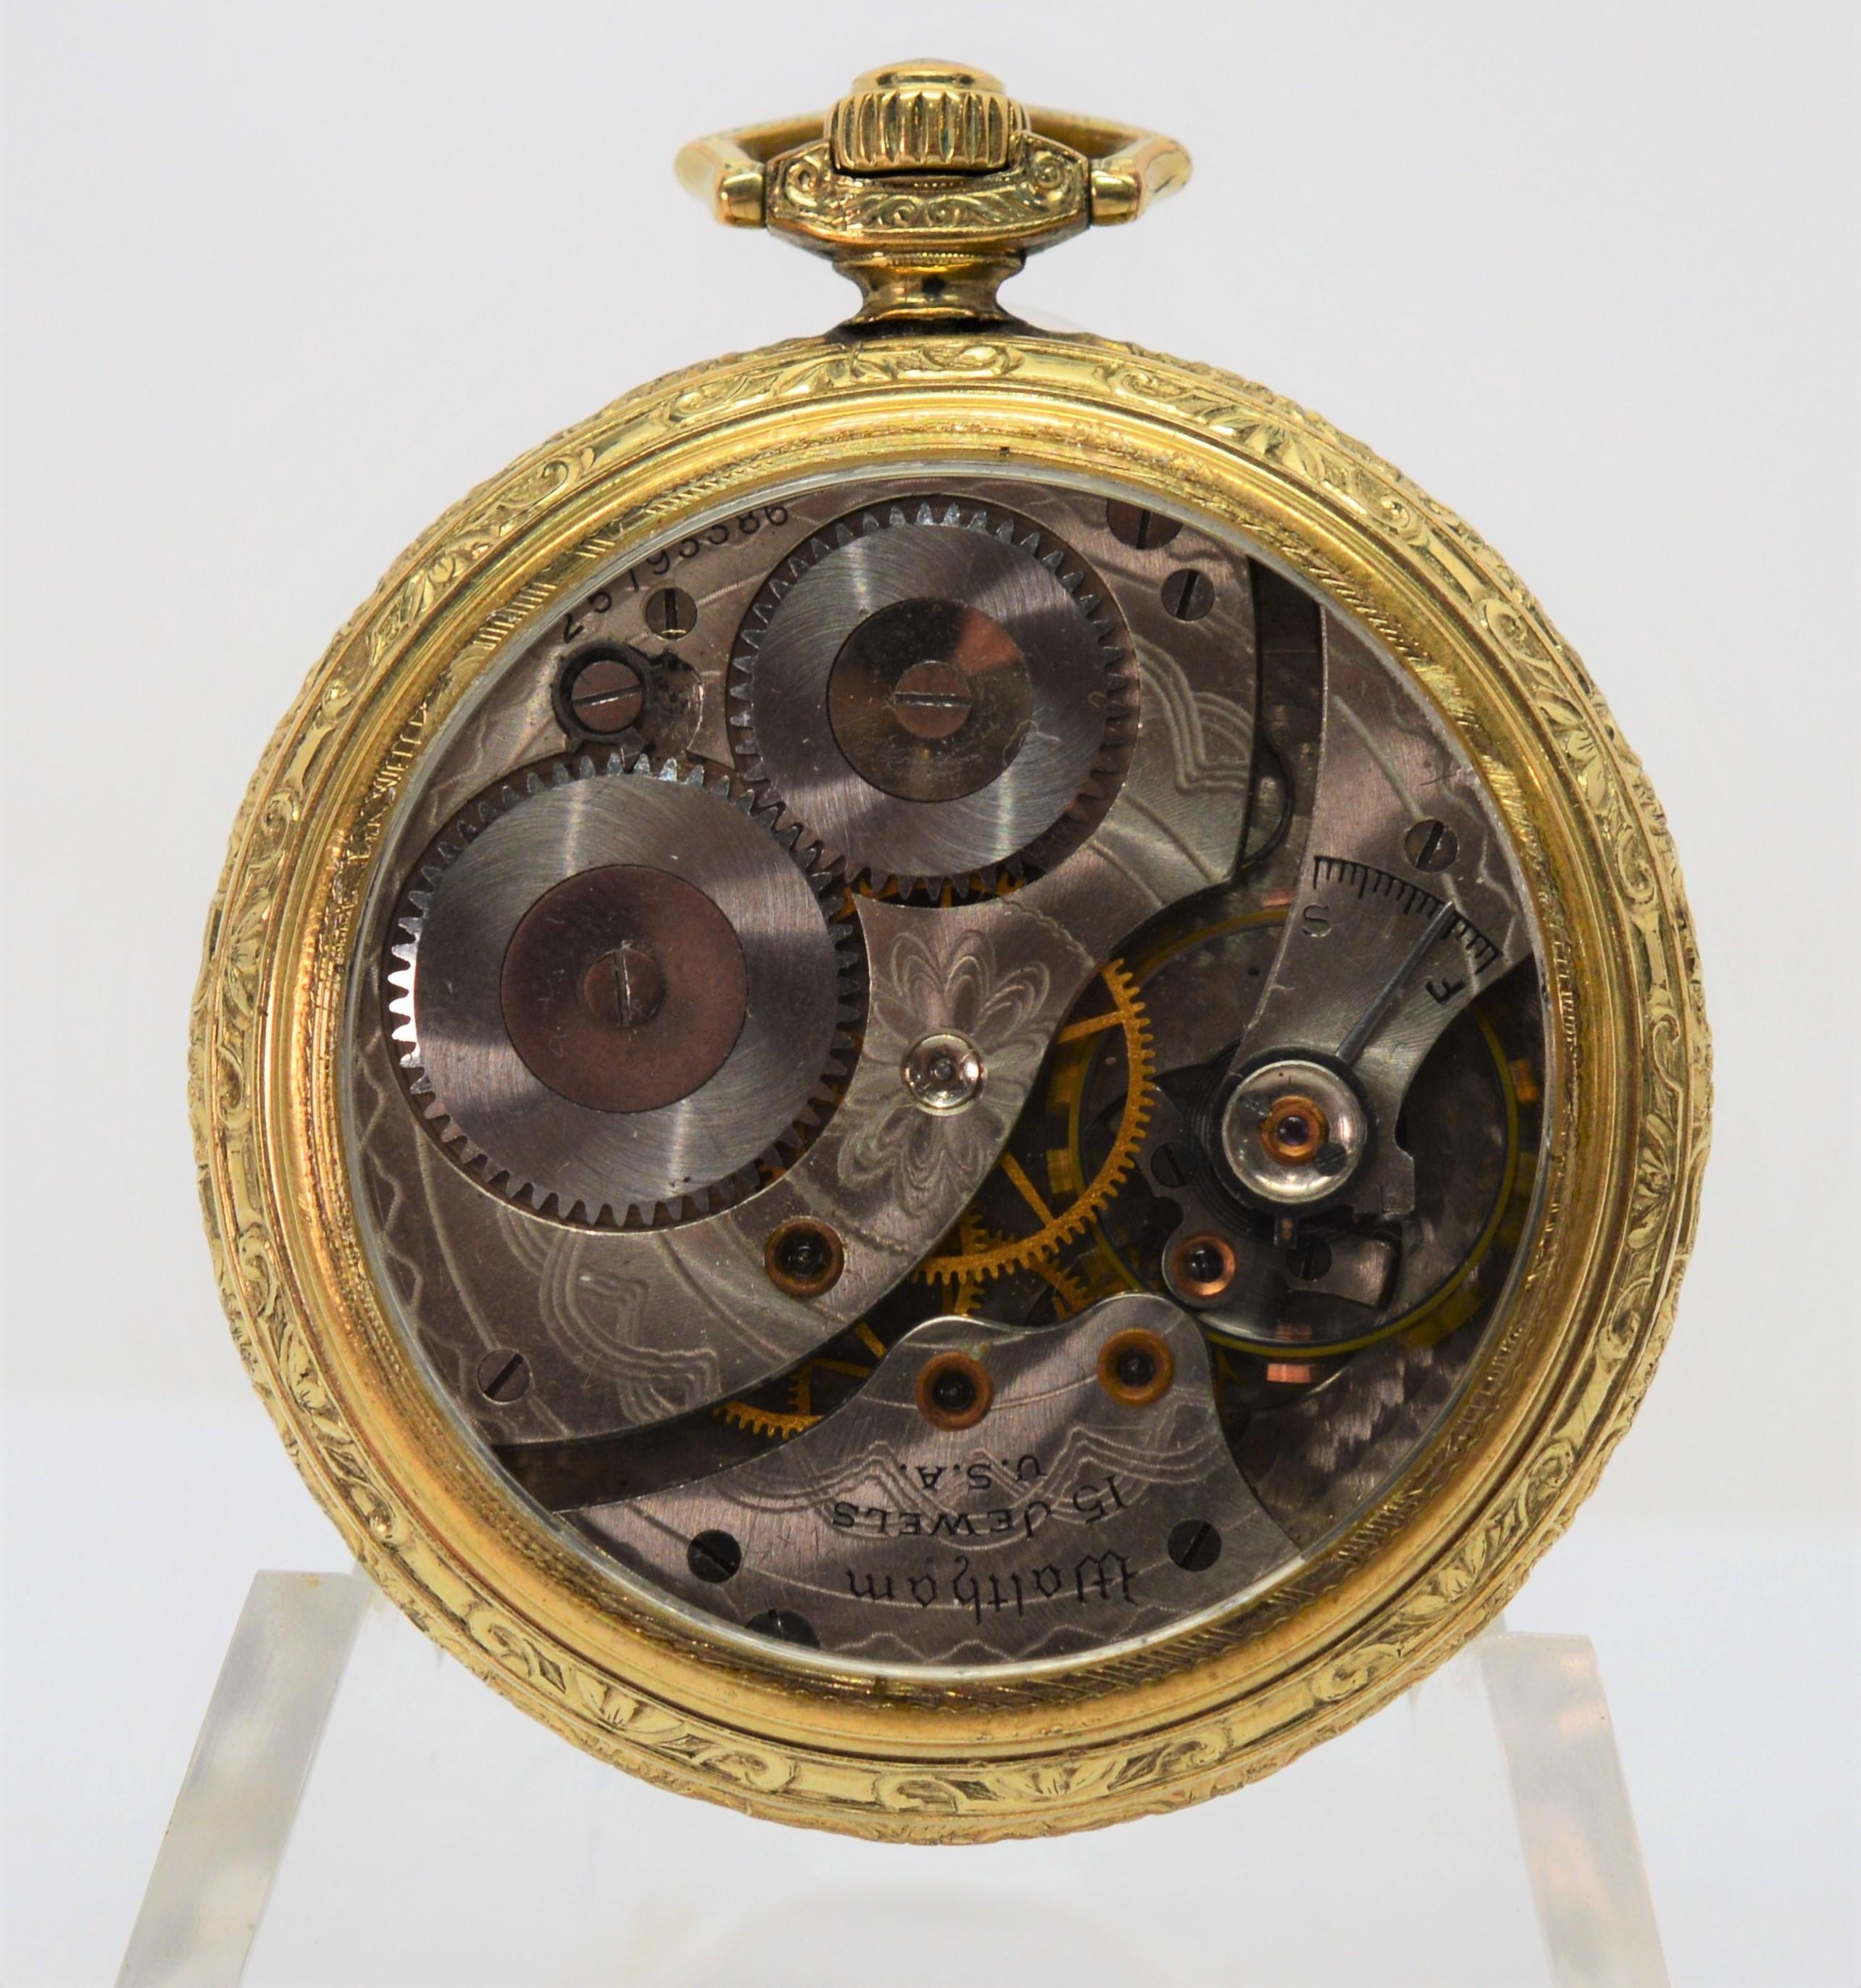 By Waltham Watch Company, this circa 1926 antique brass pocket watch, model number 1894, has been restored with a display back for a mesmerizing view of its beautiful fancy acid etched fifteen jewel movement. In watch size is 12S ( approximately 1